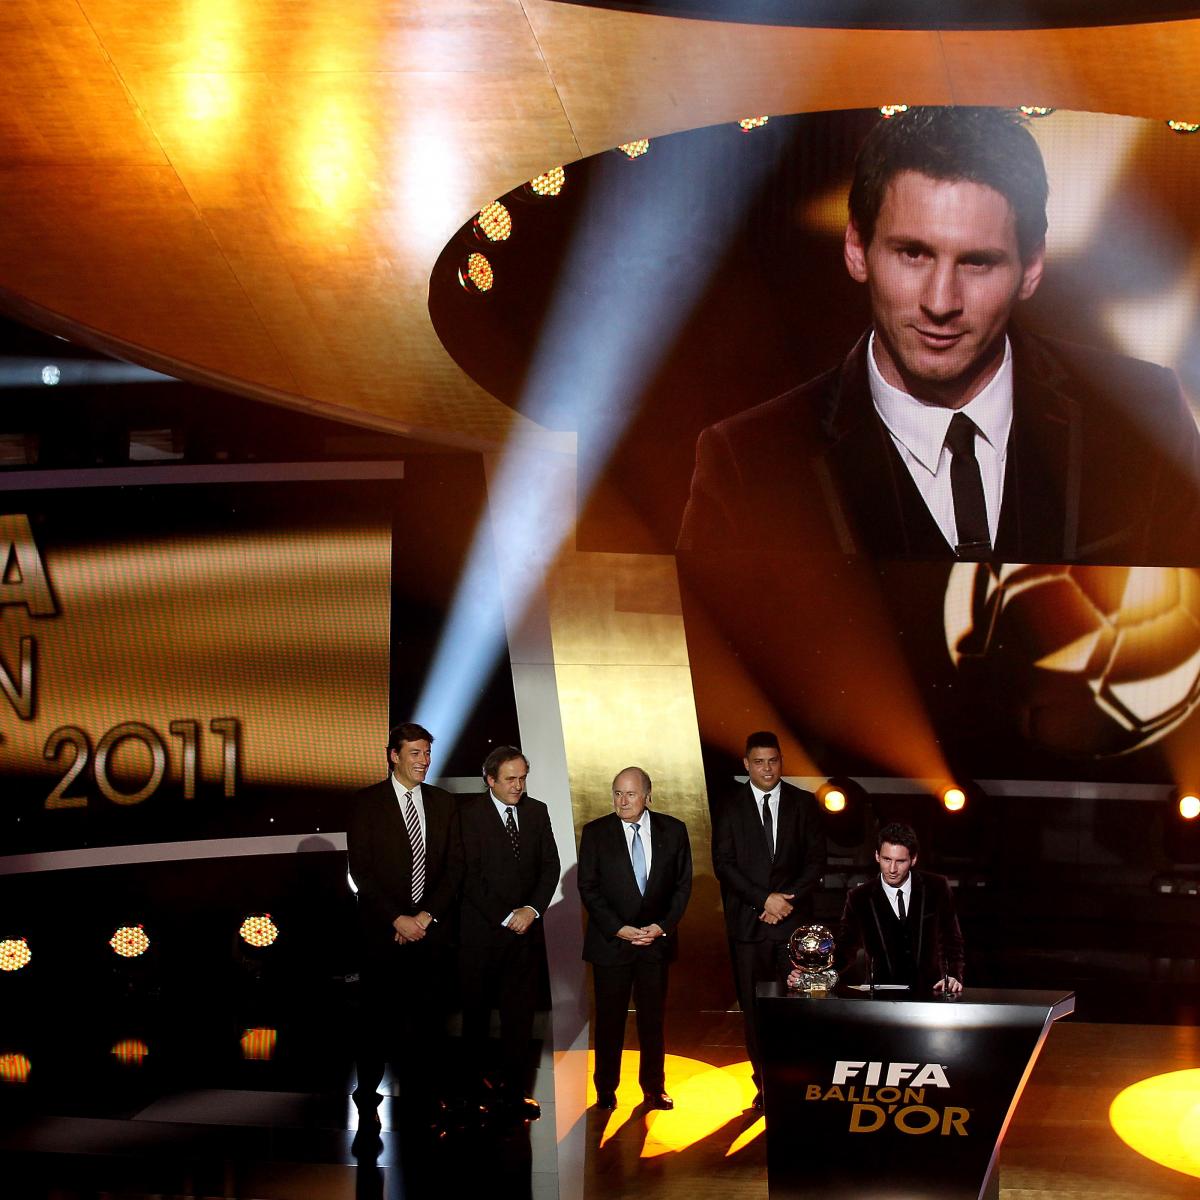 Ballon D'Or Finalists Are Familiar, but the Storylines Remain